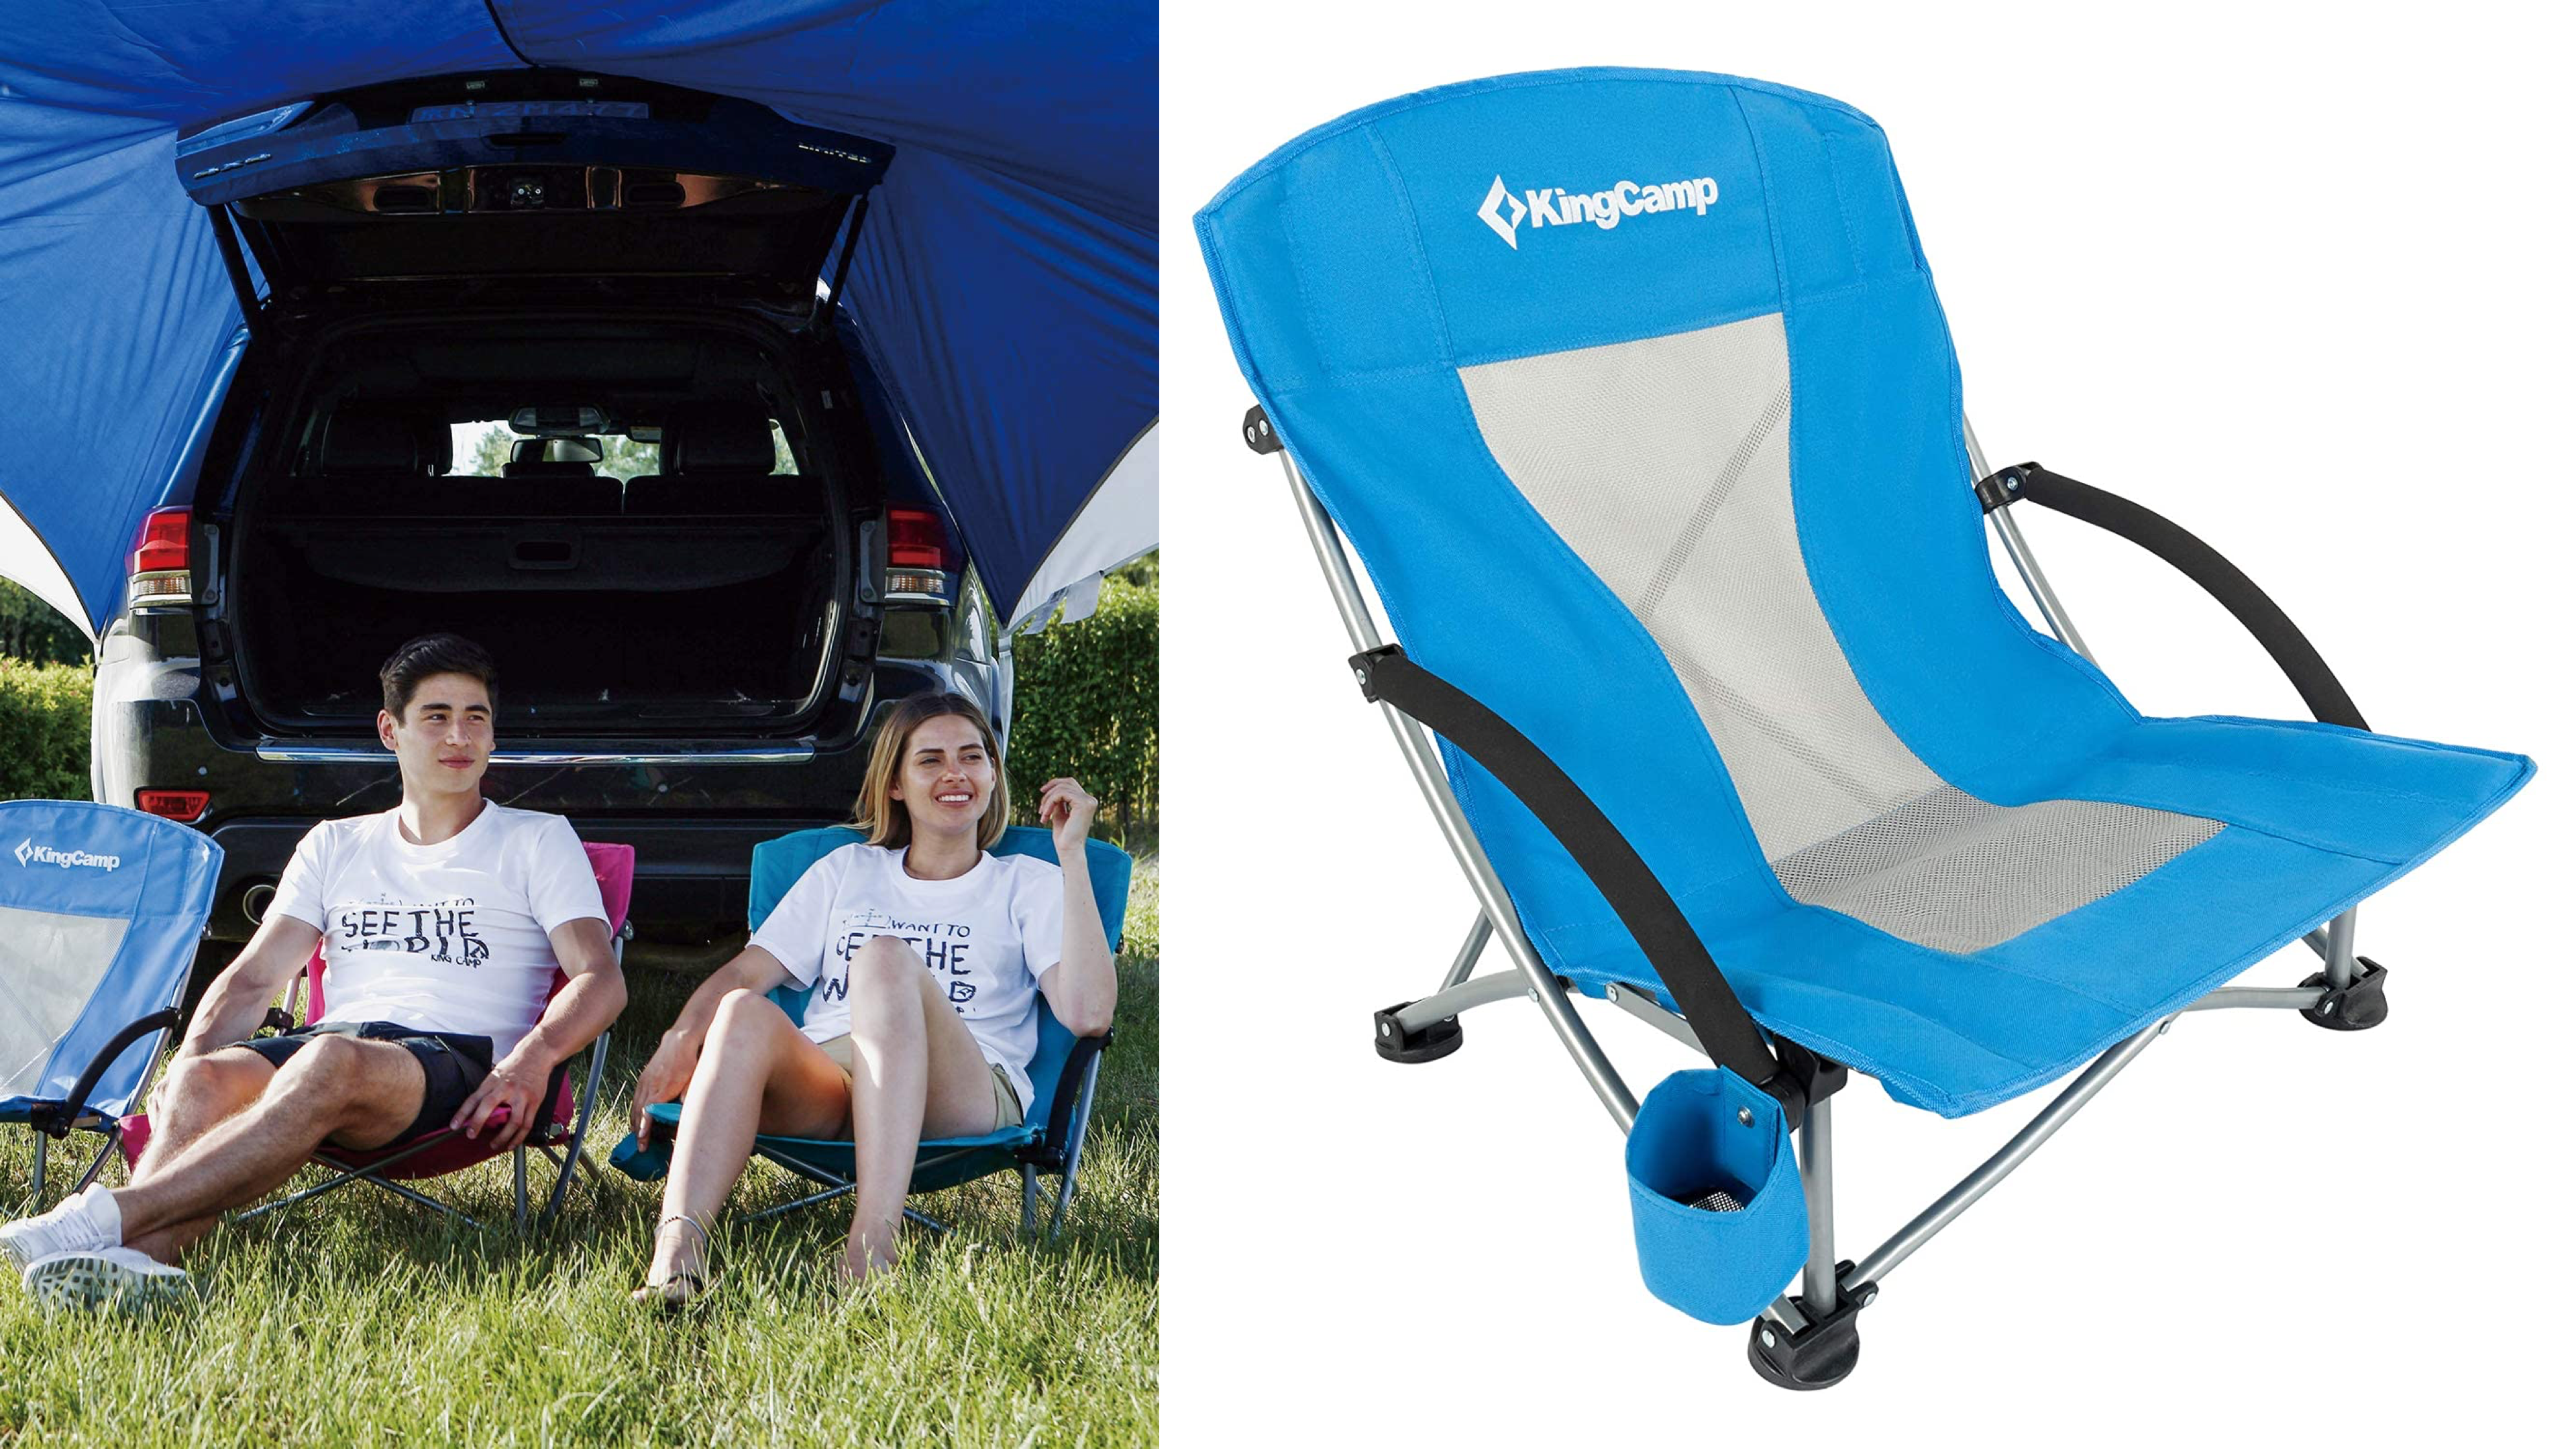 lightweight blue portable folding chair to bring to the park or beach